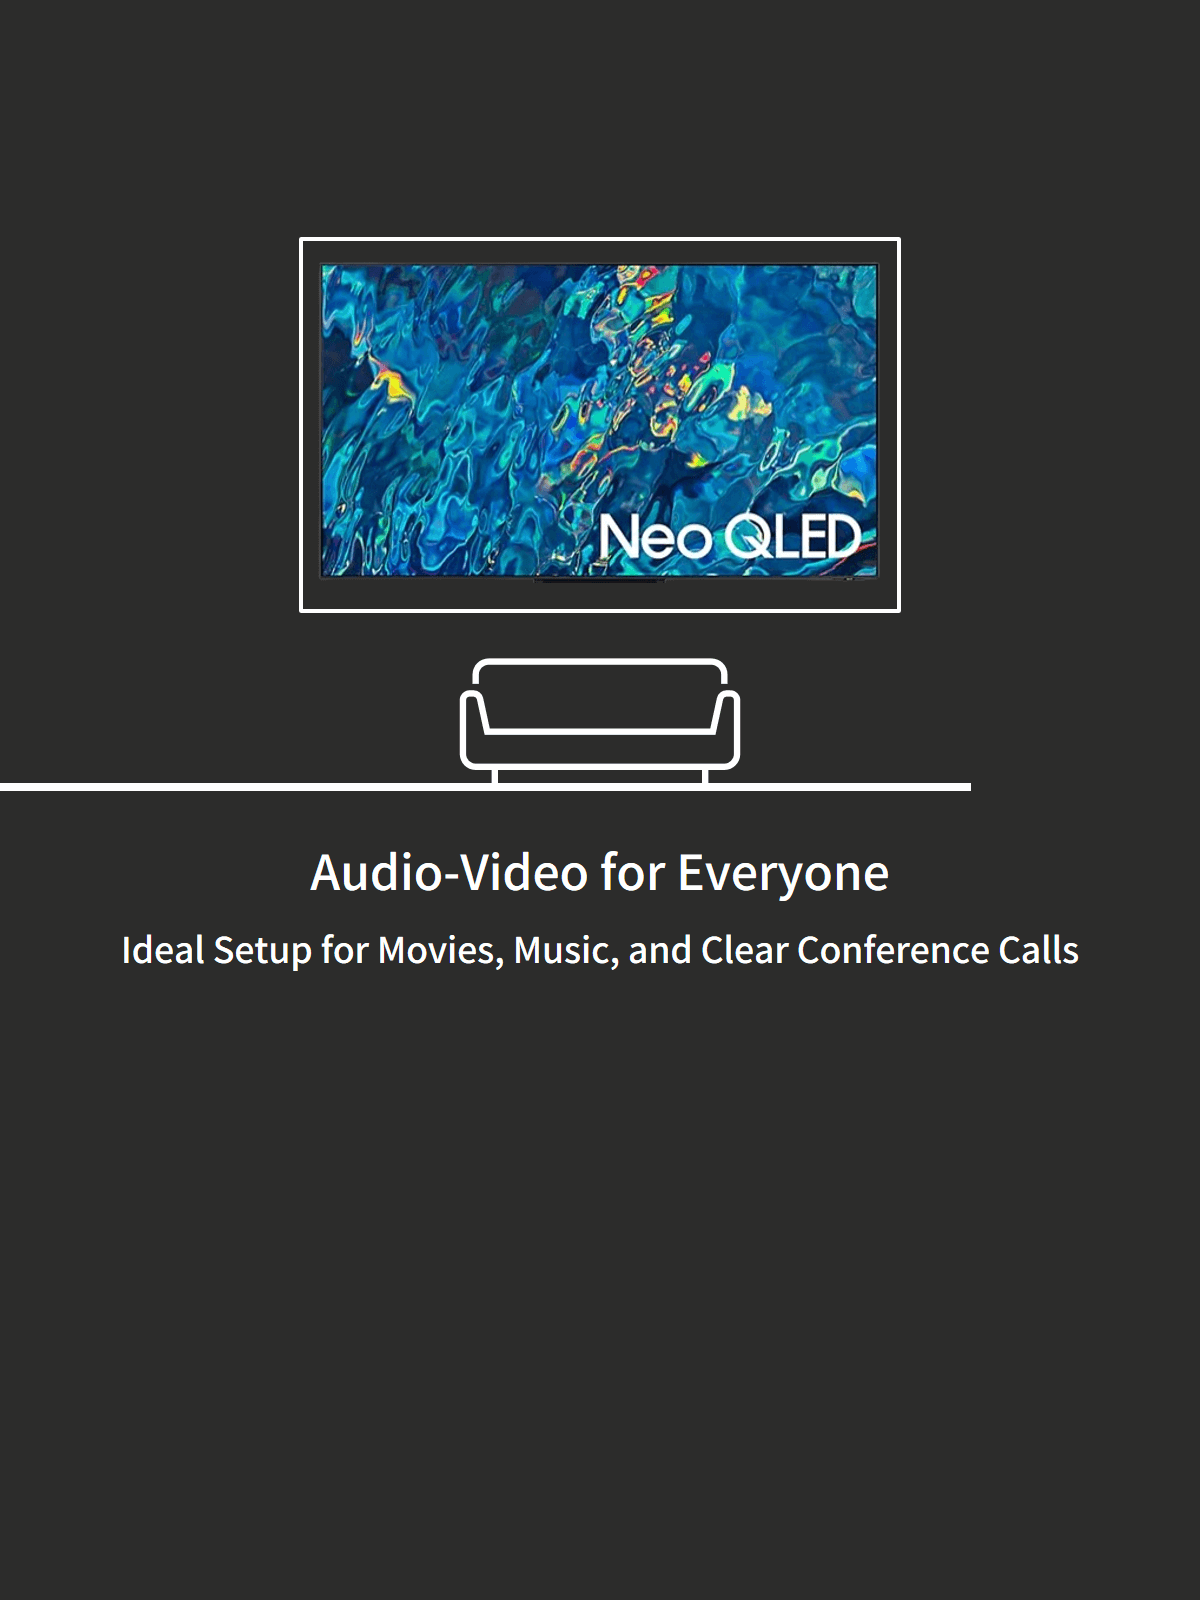 Mobile Slider Banner TV and Mini Sub Woofer and Headphones images with text Audio-Video for Everyone Find the Perfect setup for movies , music, or crystal clear conference room meetings